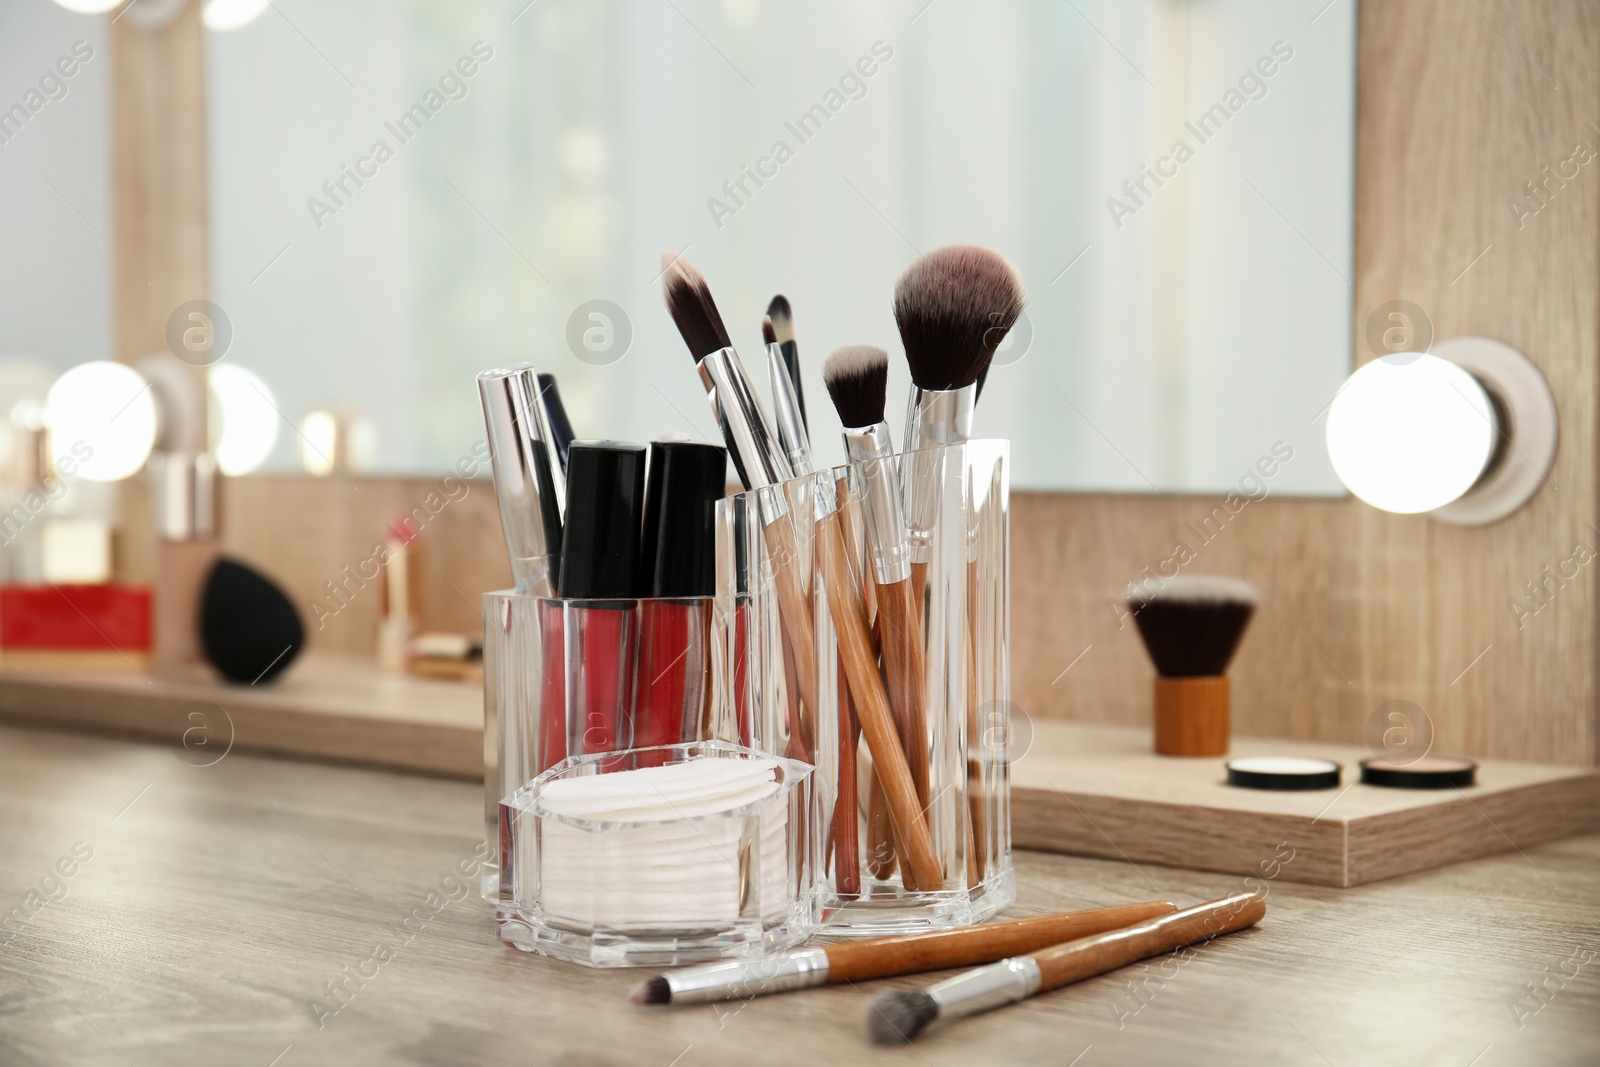 Photo of Makeup cosmetic products and tools on dressing table